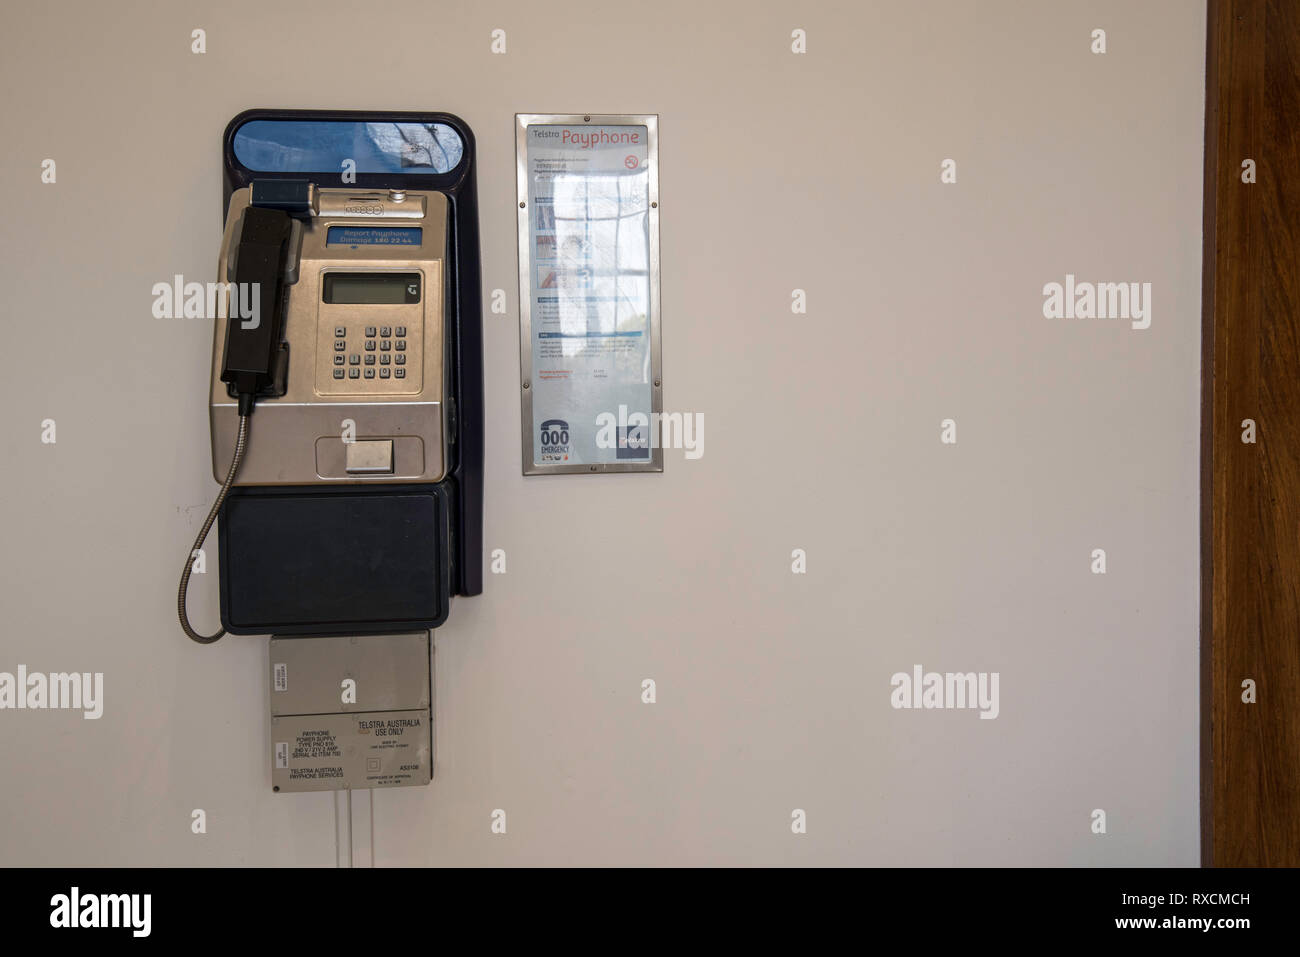 A Telstra payphone mounted on an interior wall at the Mitchell Library in Sydney, Australia Stock Photo